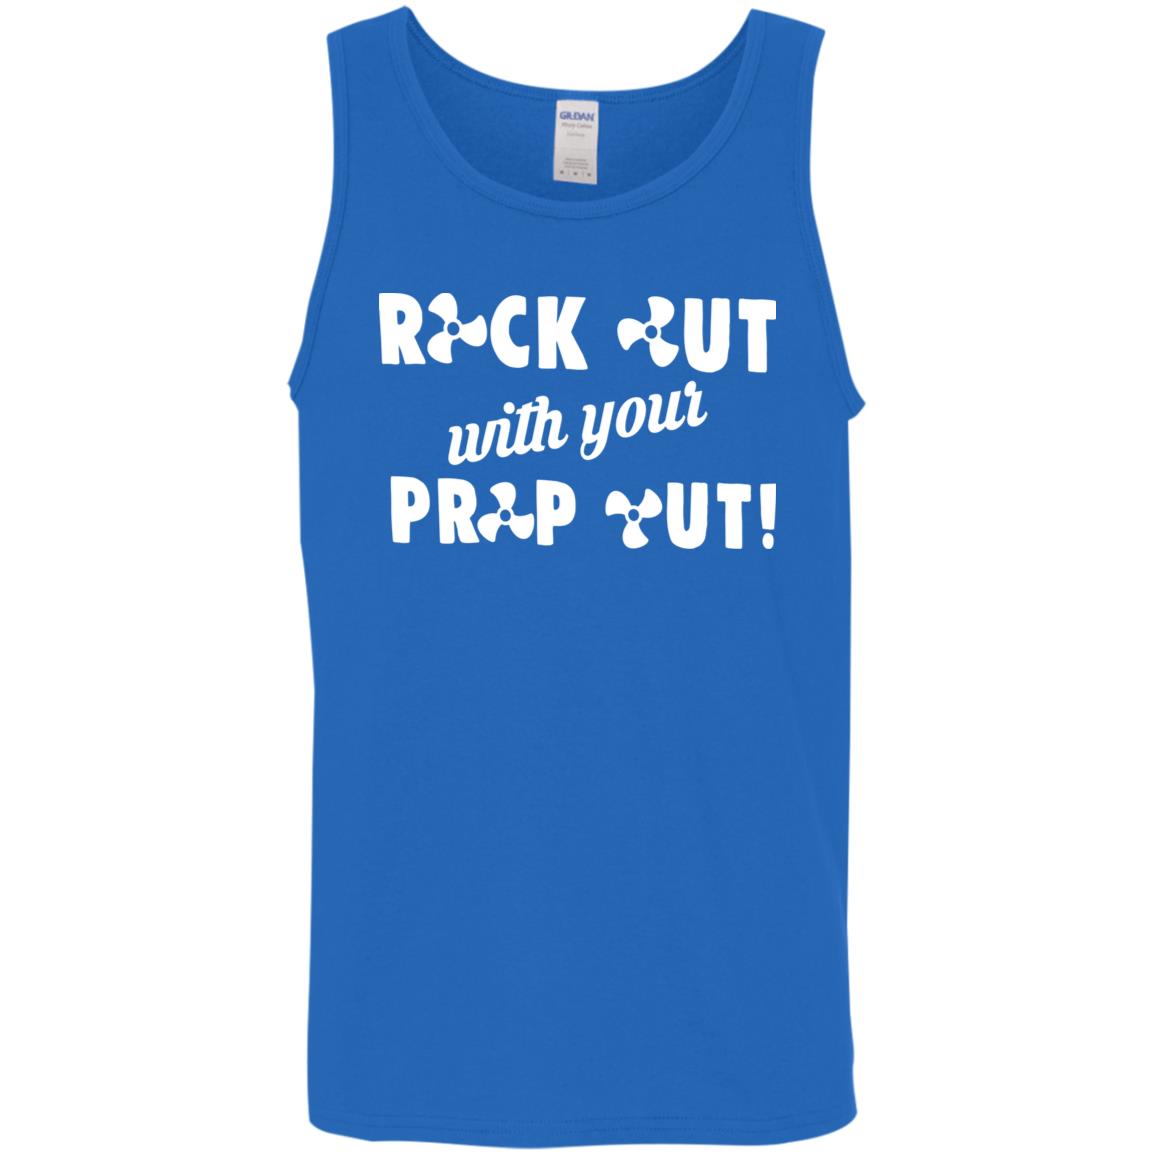 HRCL FL - Rock Out with your Prop Out - 2 Sided G520 Cotton Tank Top 5.3 oz.